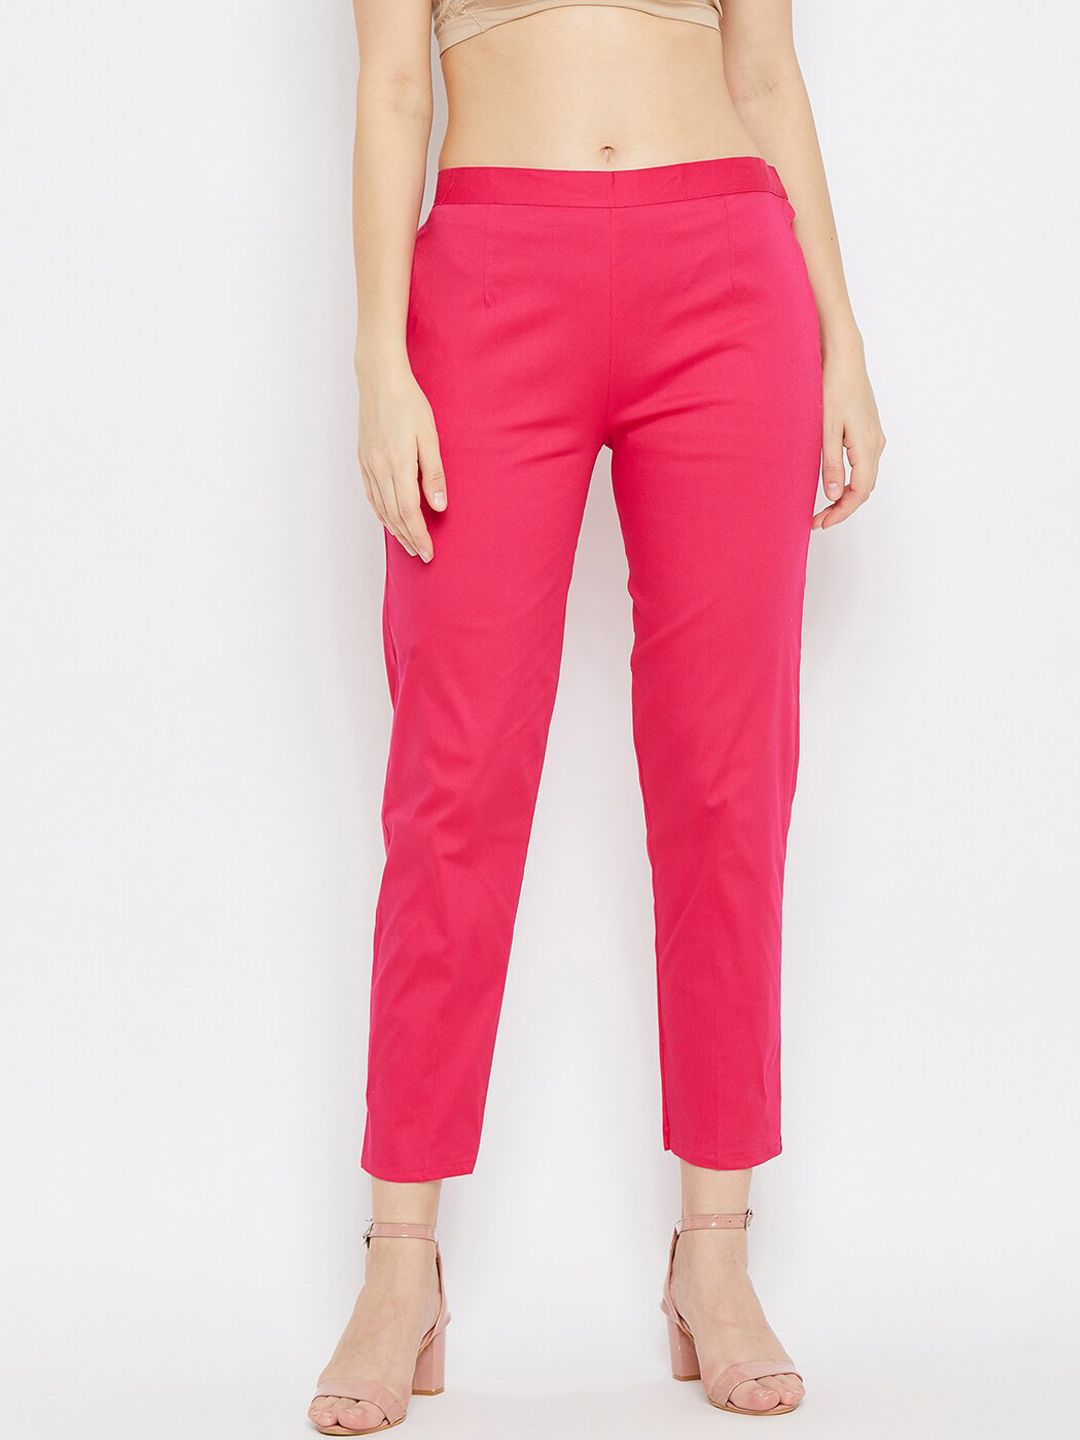 Clora Creation Women Pink Solid Regular Fit Trousers Price in India